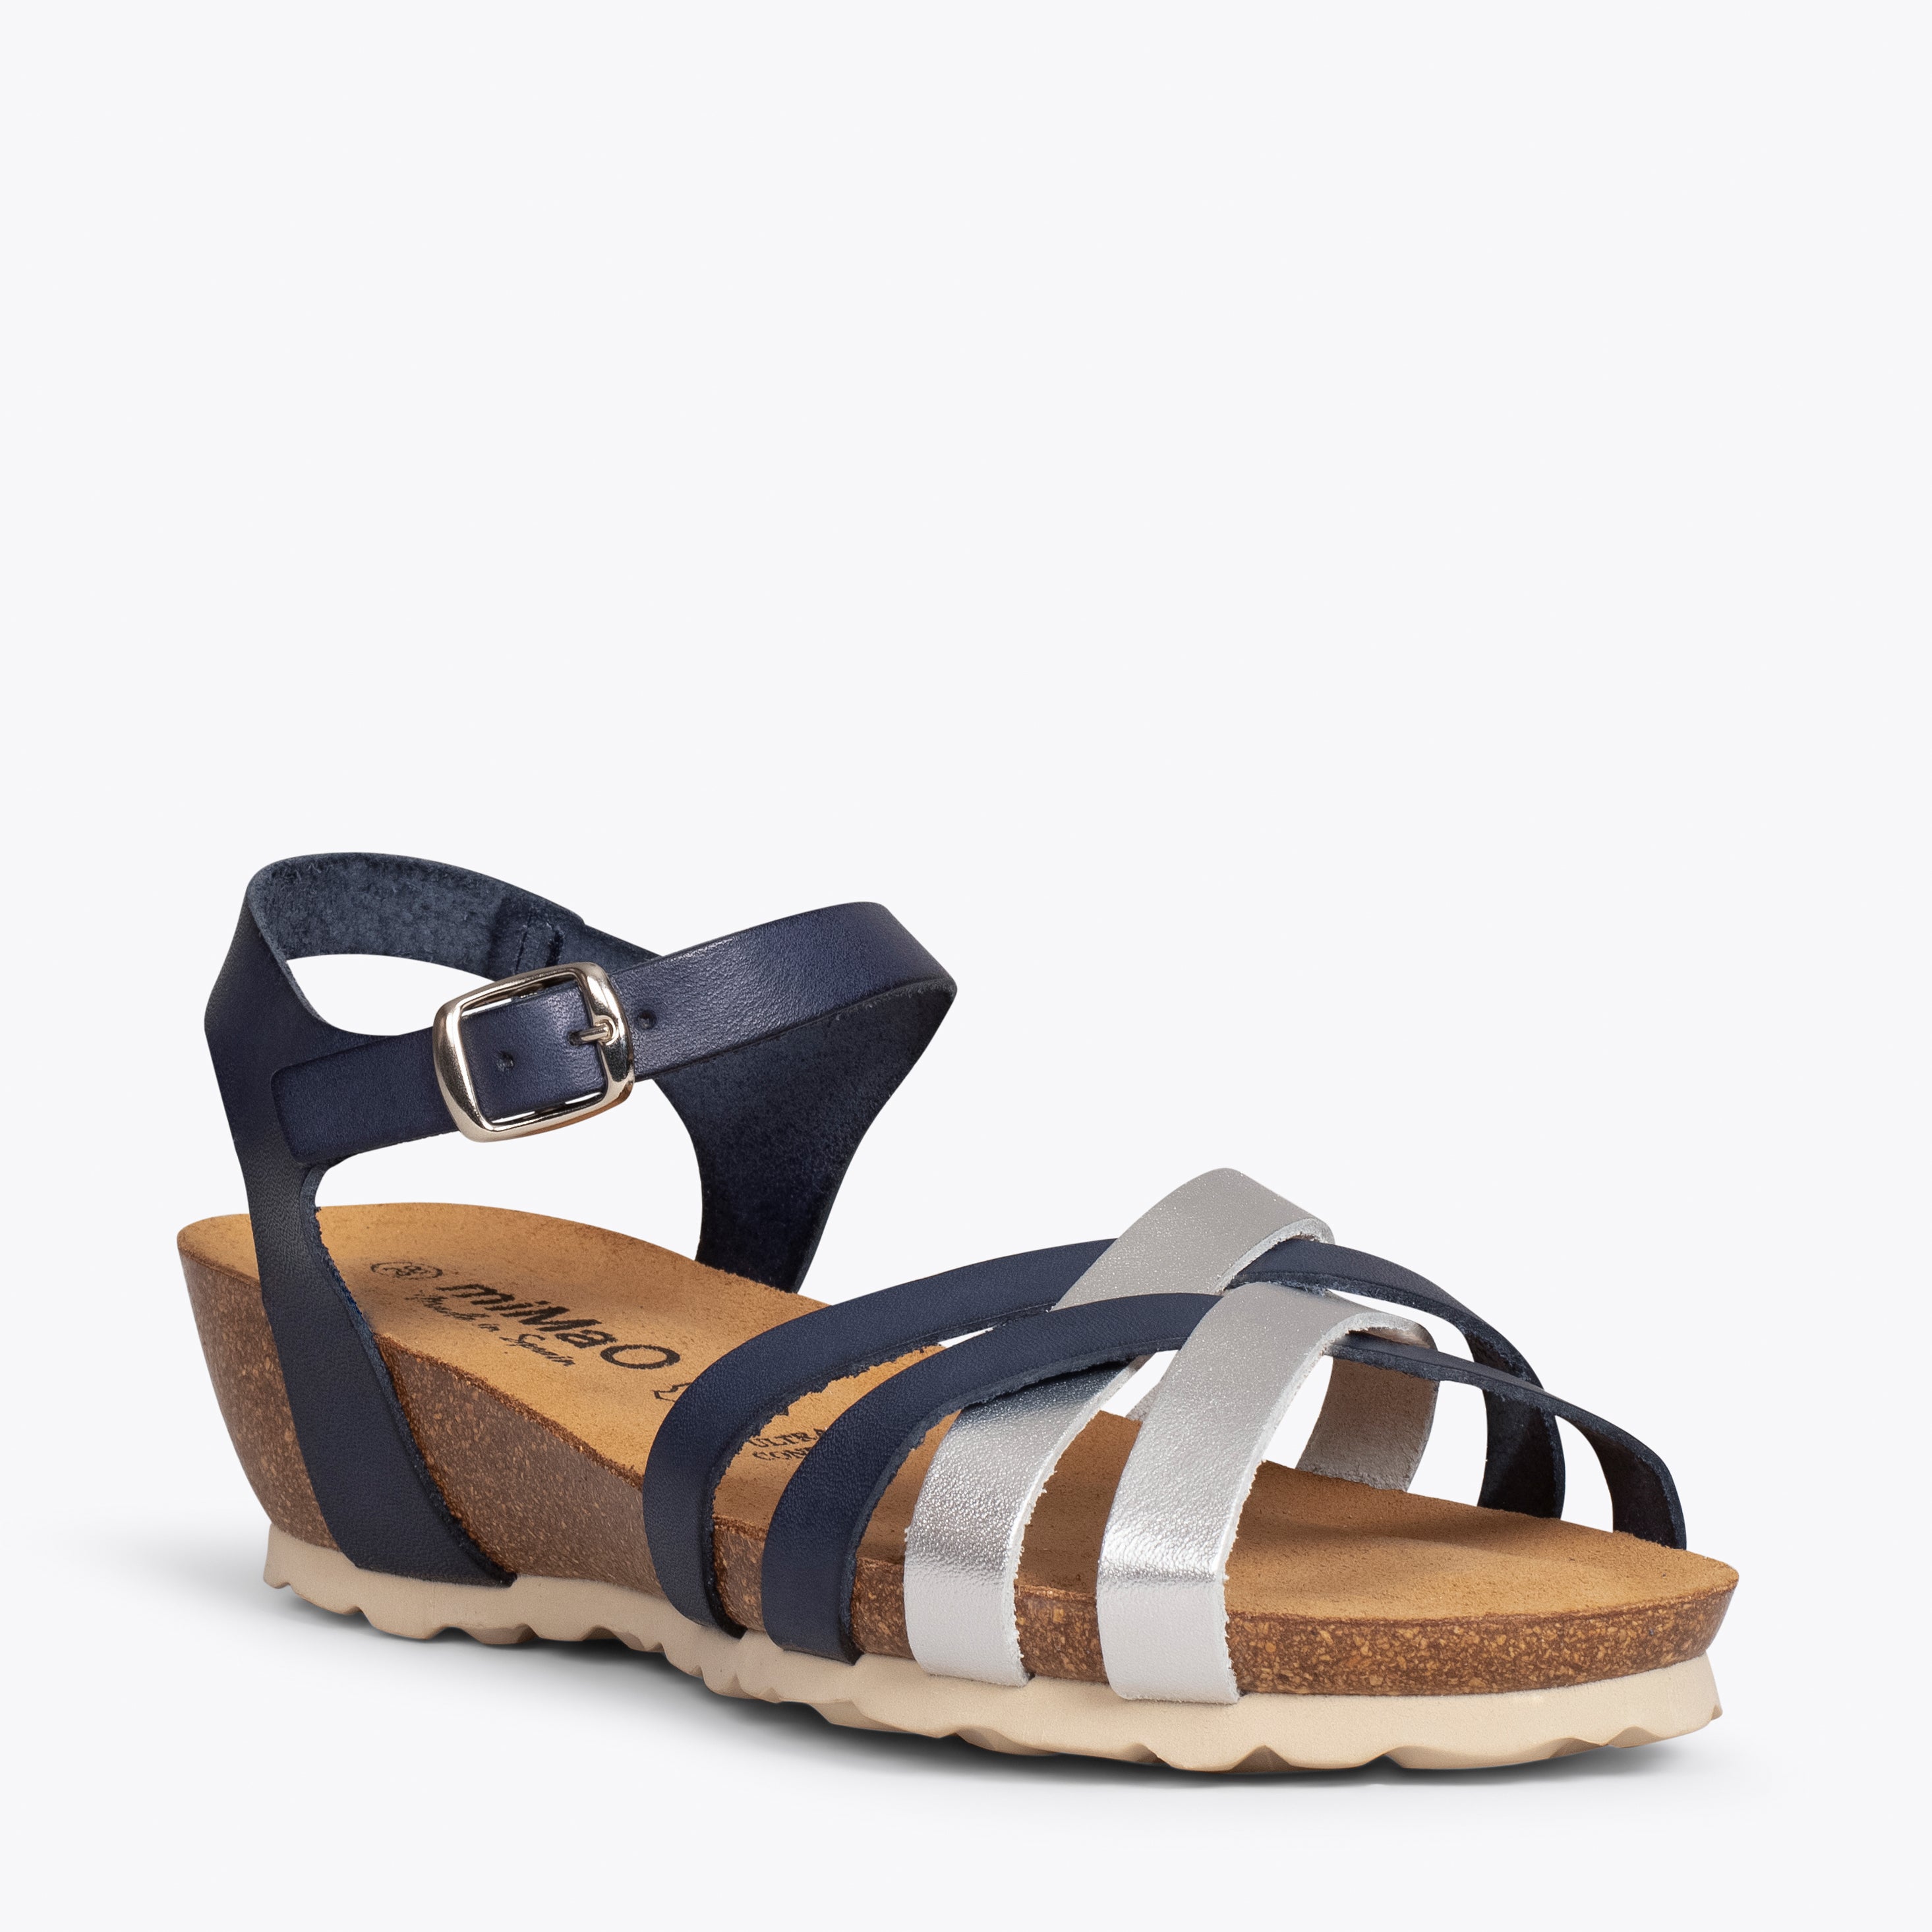 SOFT – NAVY AND SILVER sandals with BIO wedge